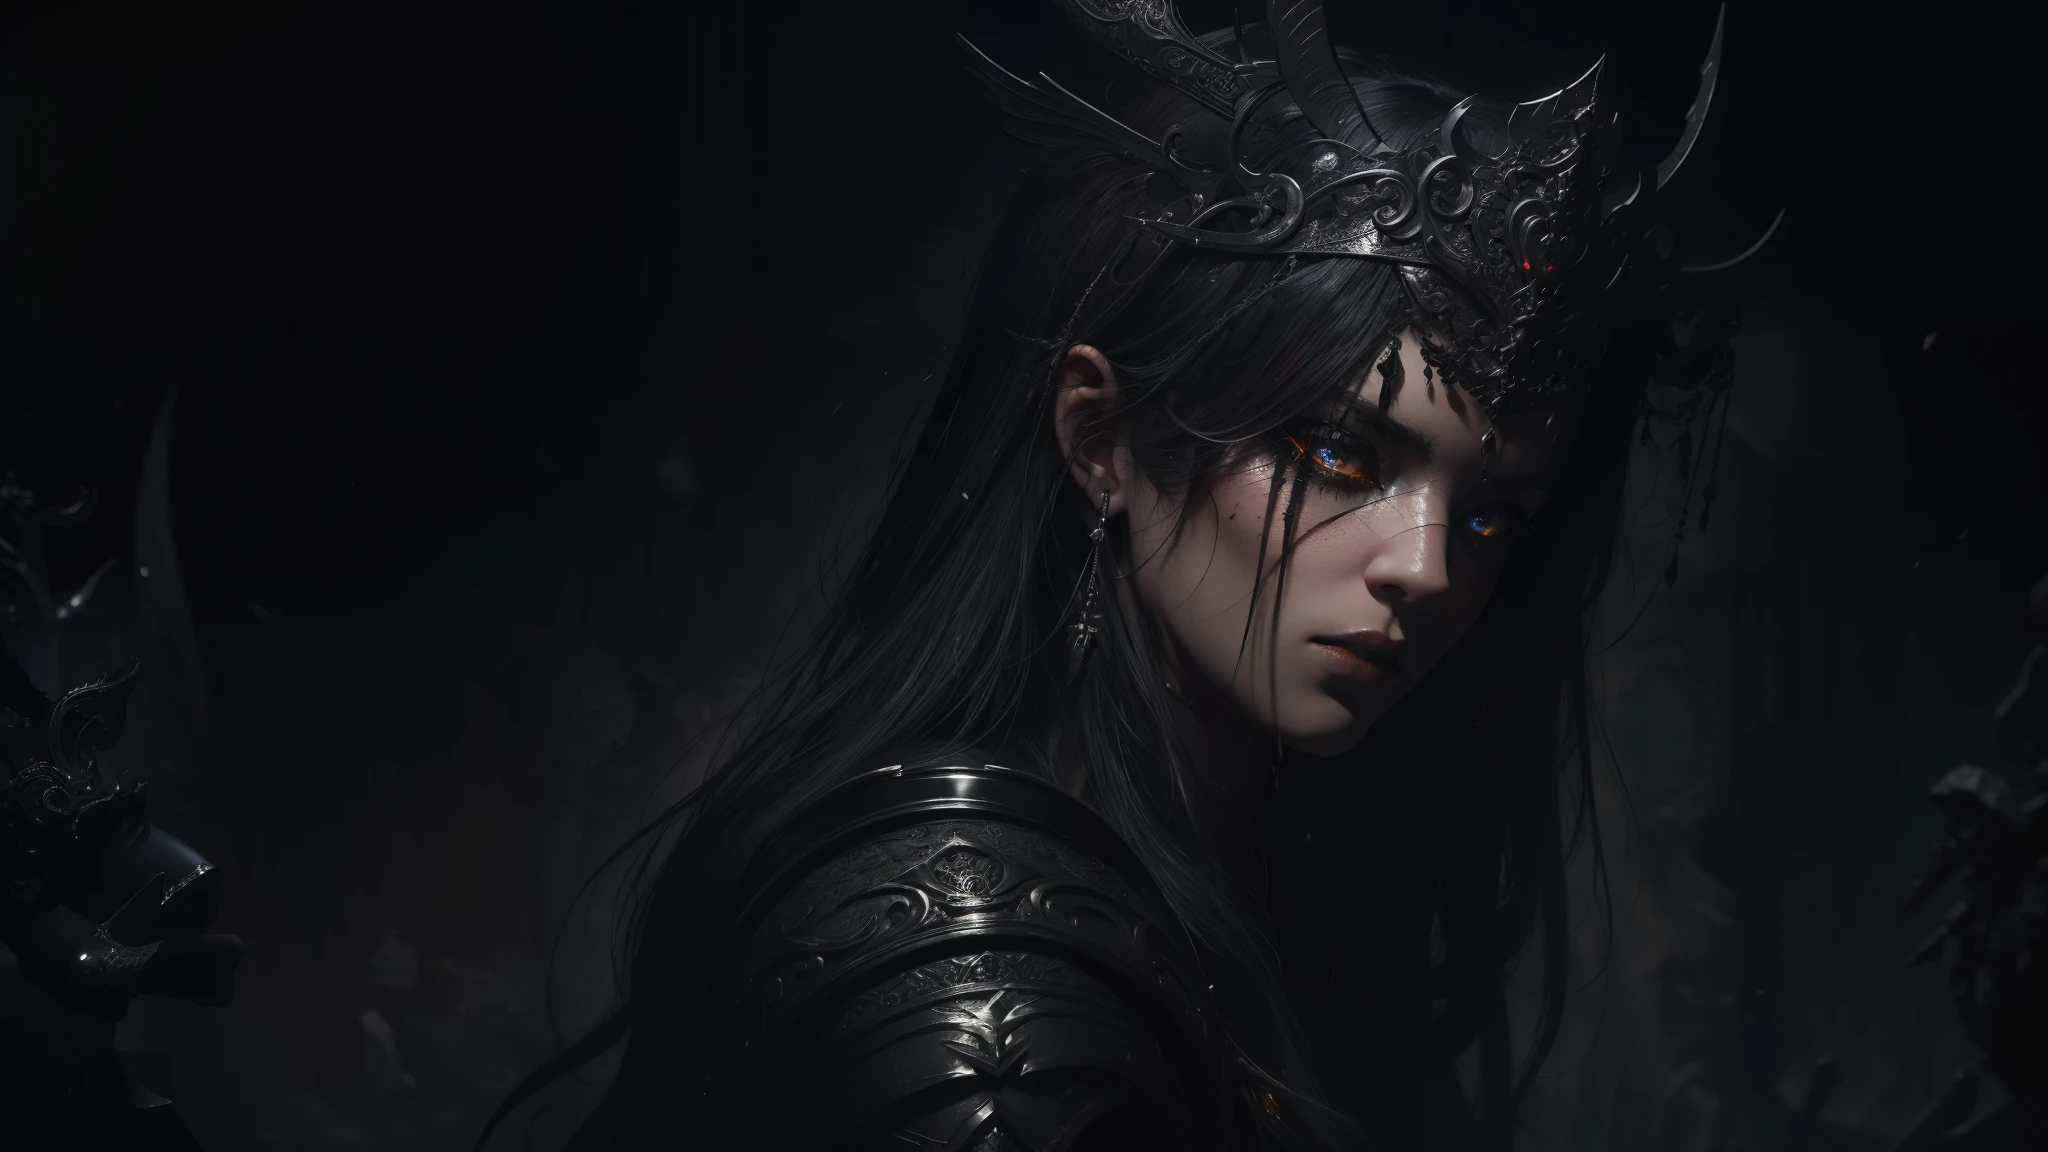 ((masterpiece, ultra detailed)), concept art, illustration, digital art, 1girl, solo, pale young woman surrounded by black smoke with ash ((angry face)) hidden in gothic cathedral, ( (very long hair, black hair)),((red iris and pupil)), knight, silver black knight armor, ((incredibly beautiful)), beautiful eyes, dynamic pose, battle posture ready, elegant pose, red ash, black volumetric smoke dense dark theme,  black smoke with ash, dark theme, hdr, bloom, bright, dimming lighting, backlight, cinematic lighting, soft lighting, natural lighting, dramatic lighting, dark lighting, (ornate), intricate, highly detailed, hyper-realistic, trend in artstation, award-winning, fascinating, elegant, RAW photo, absurd, highres, 4k, studio quality, octane, 8k uhd, League of Legends close-up, splash art, ha,  Ionia, Noxian armor